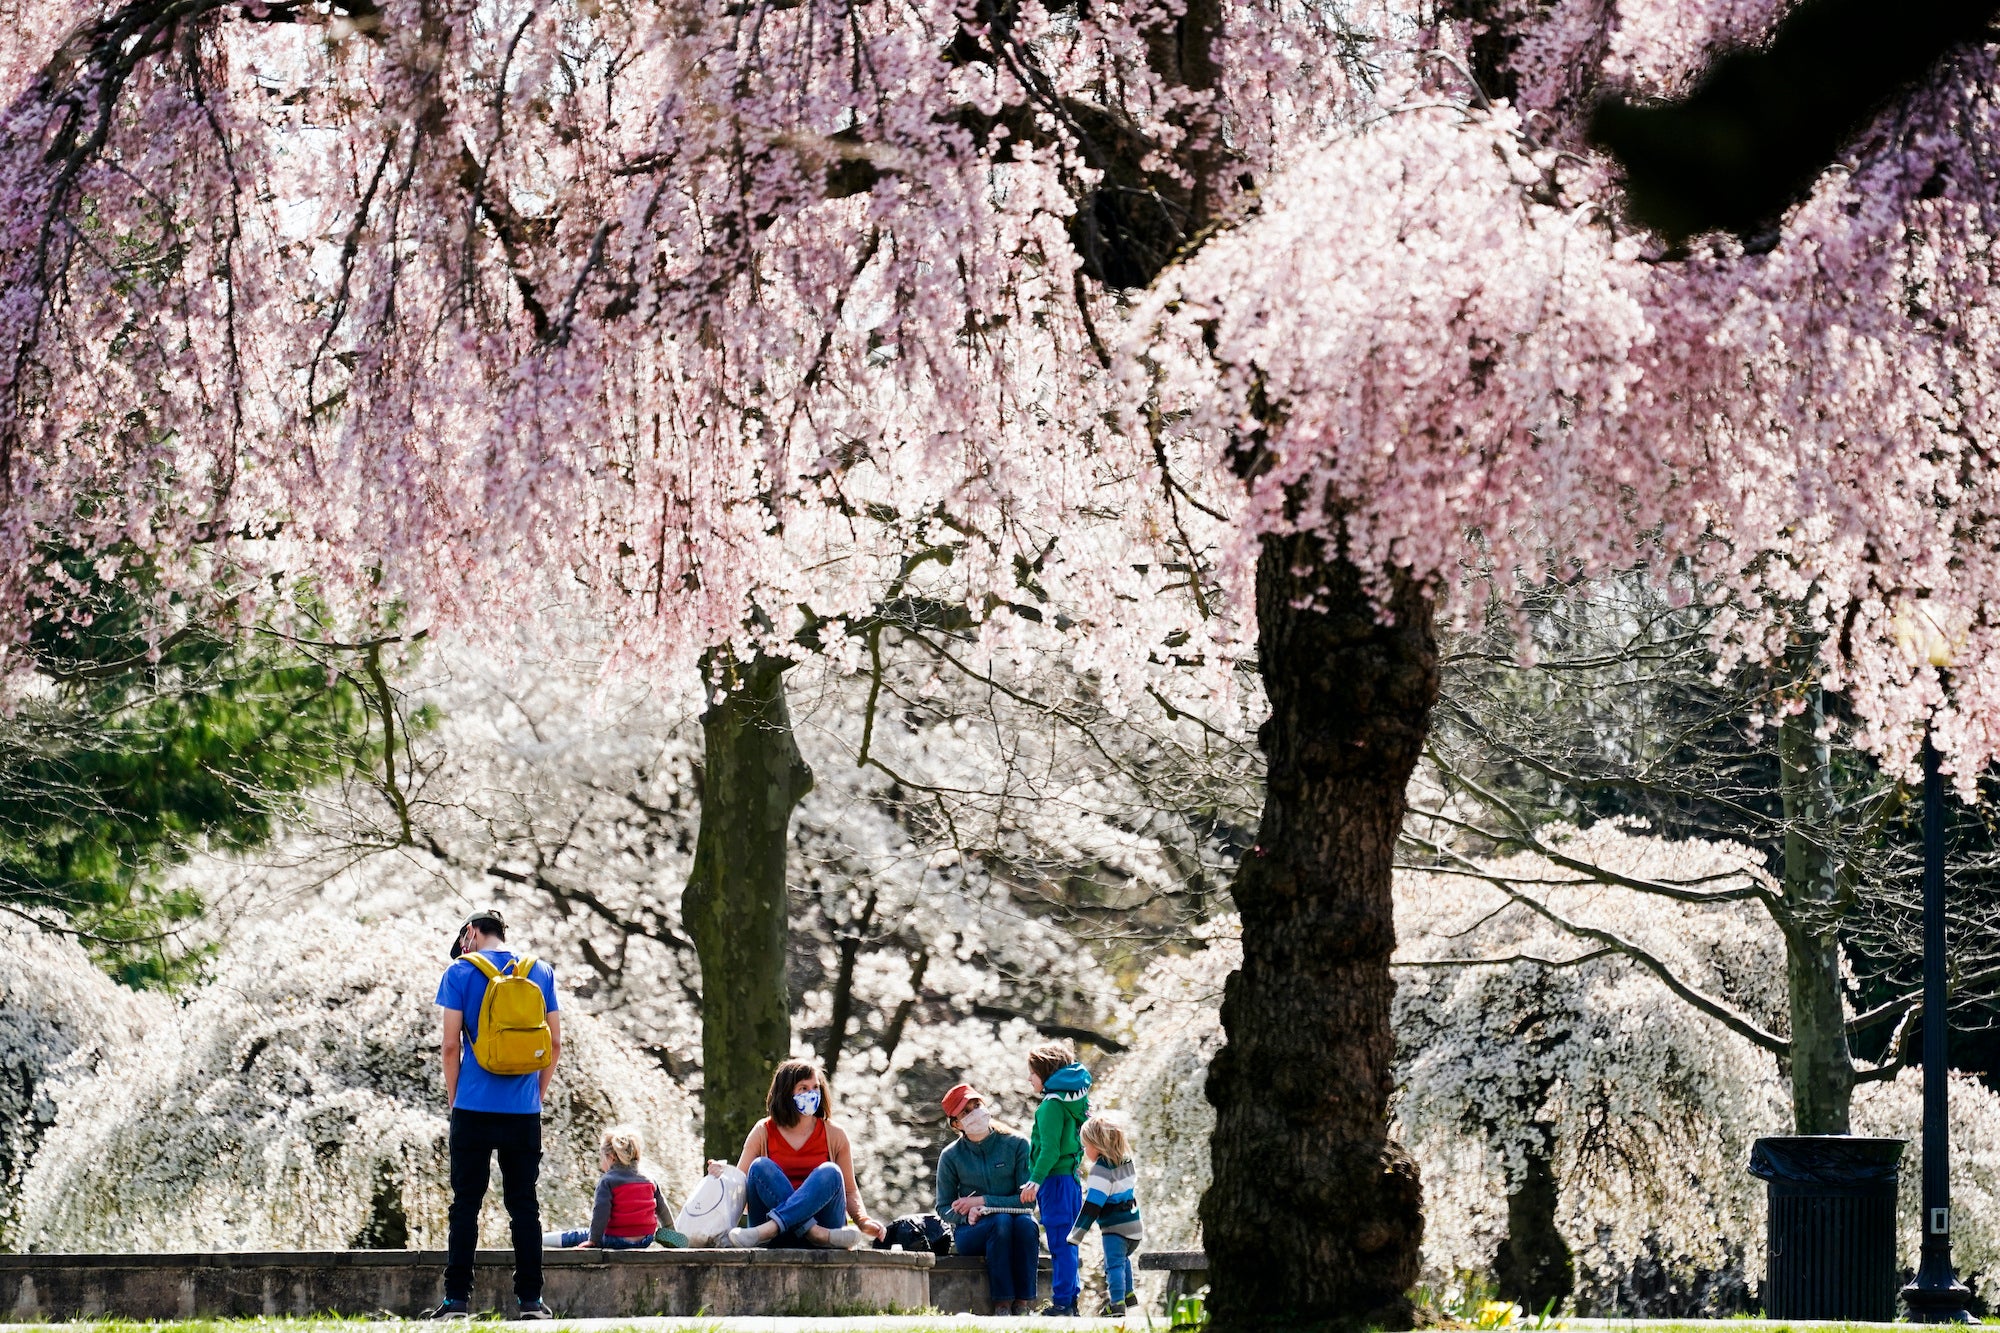 People wearing face masks gather amongst blooming cherry trees at the Fairmount Park Horticulture Center